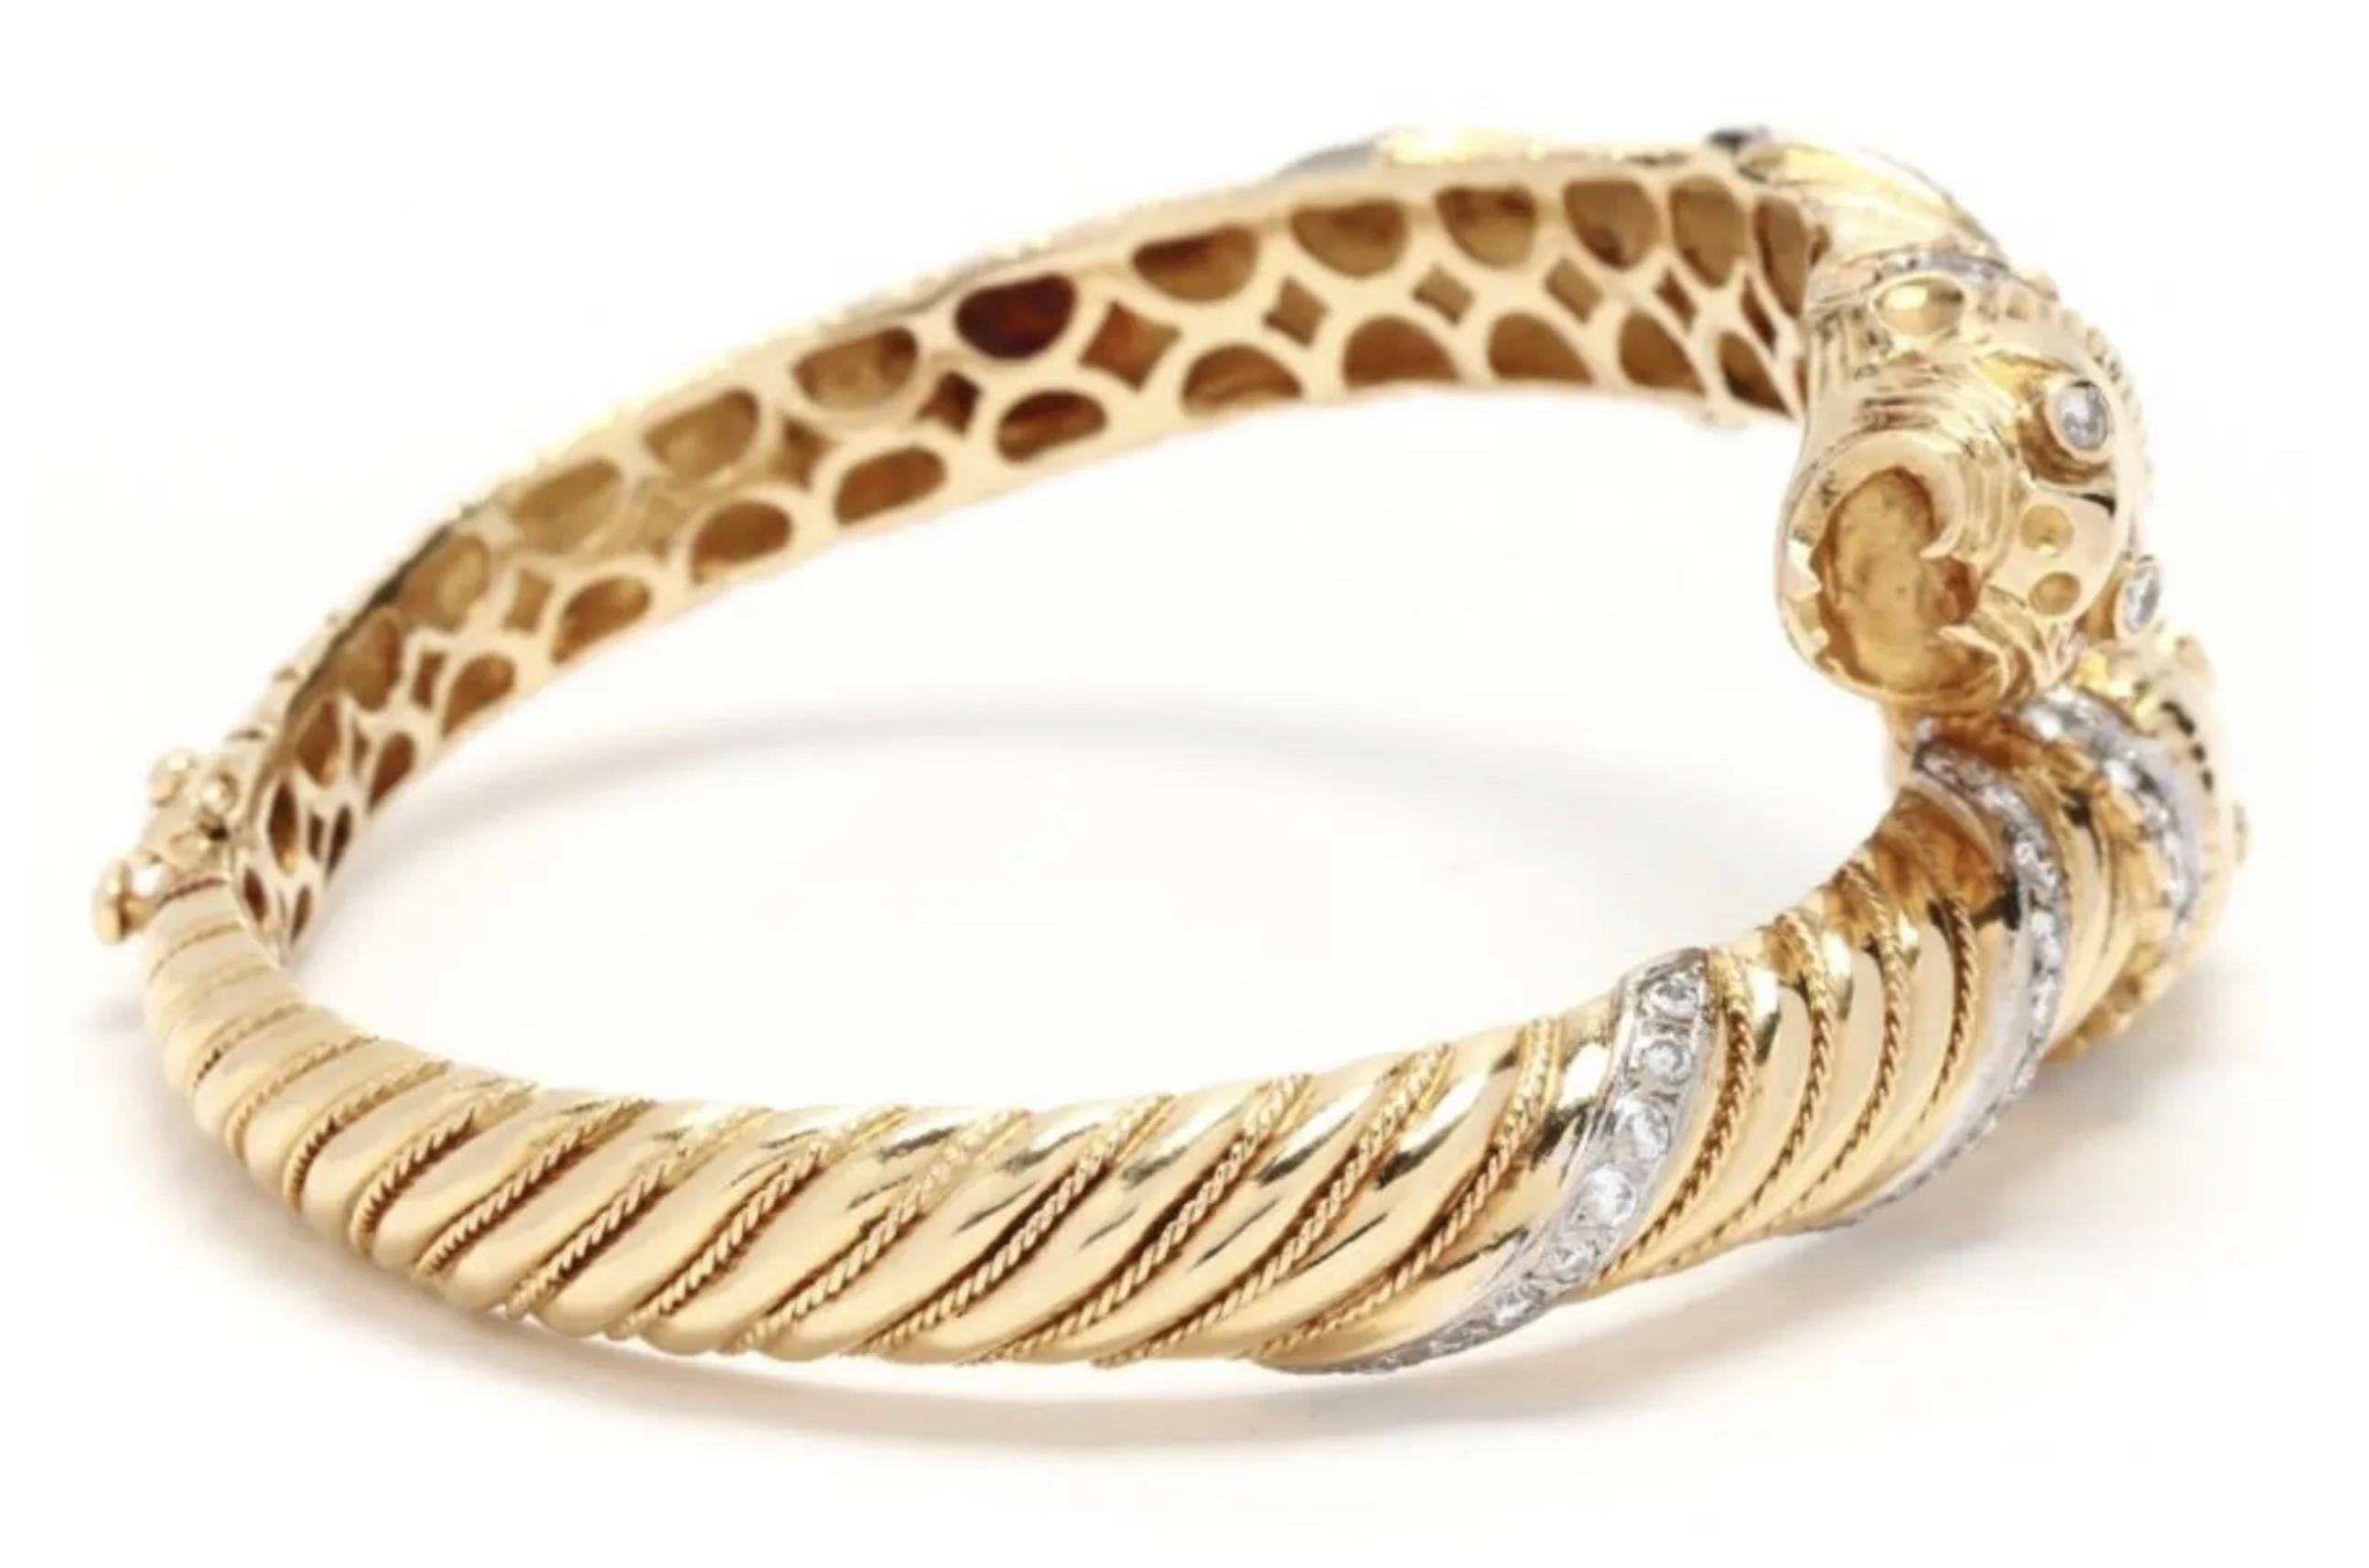 Incredible 18k gold and diamond (approx 1.68 ctw) double chimera panther head bangle. It has a significant amount of diamonds and heavy 18k gold, truly impressive craftsmanship - it is a statement piece with great value.

This bangle is hinged and